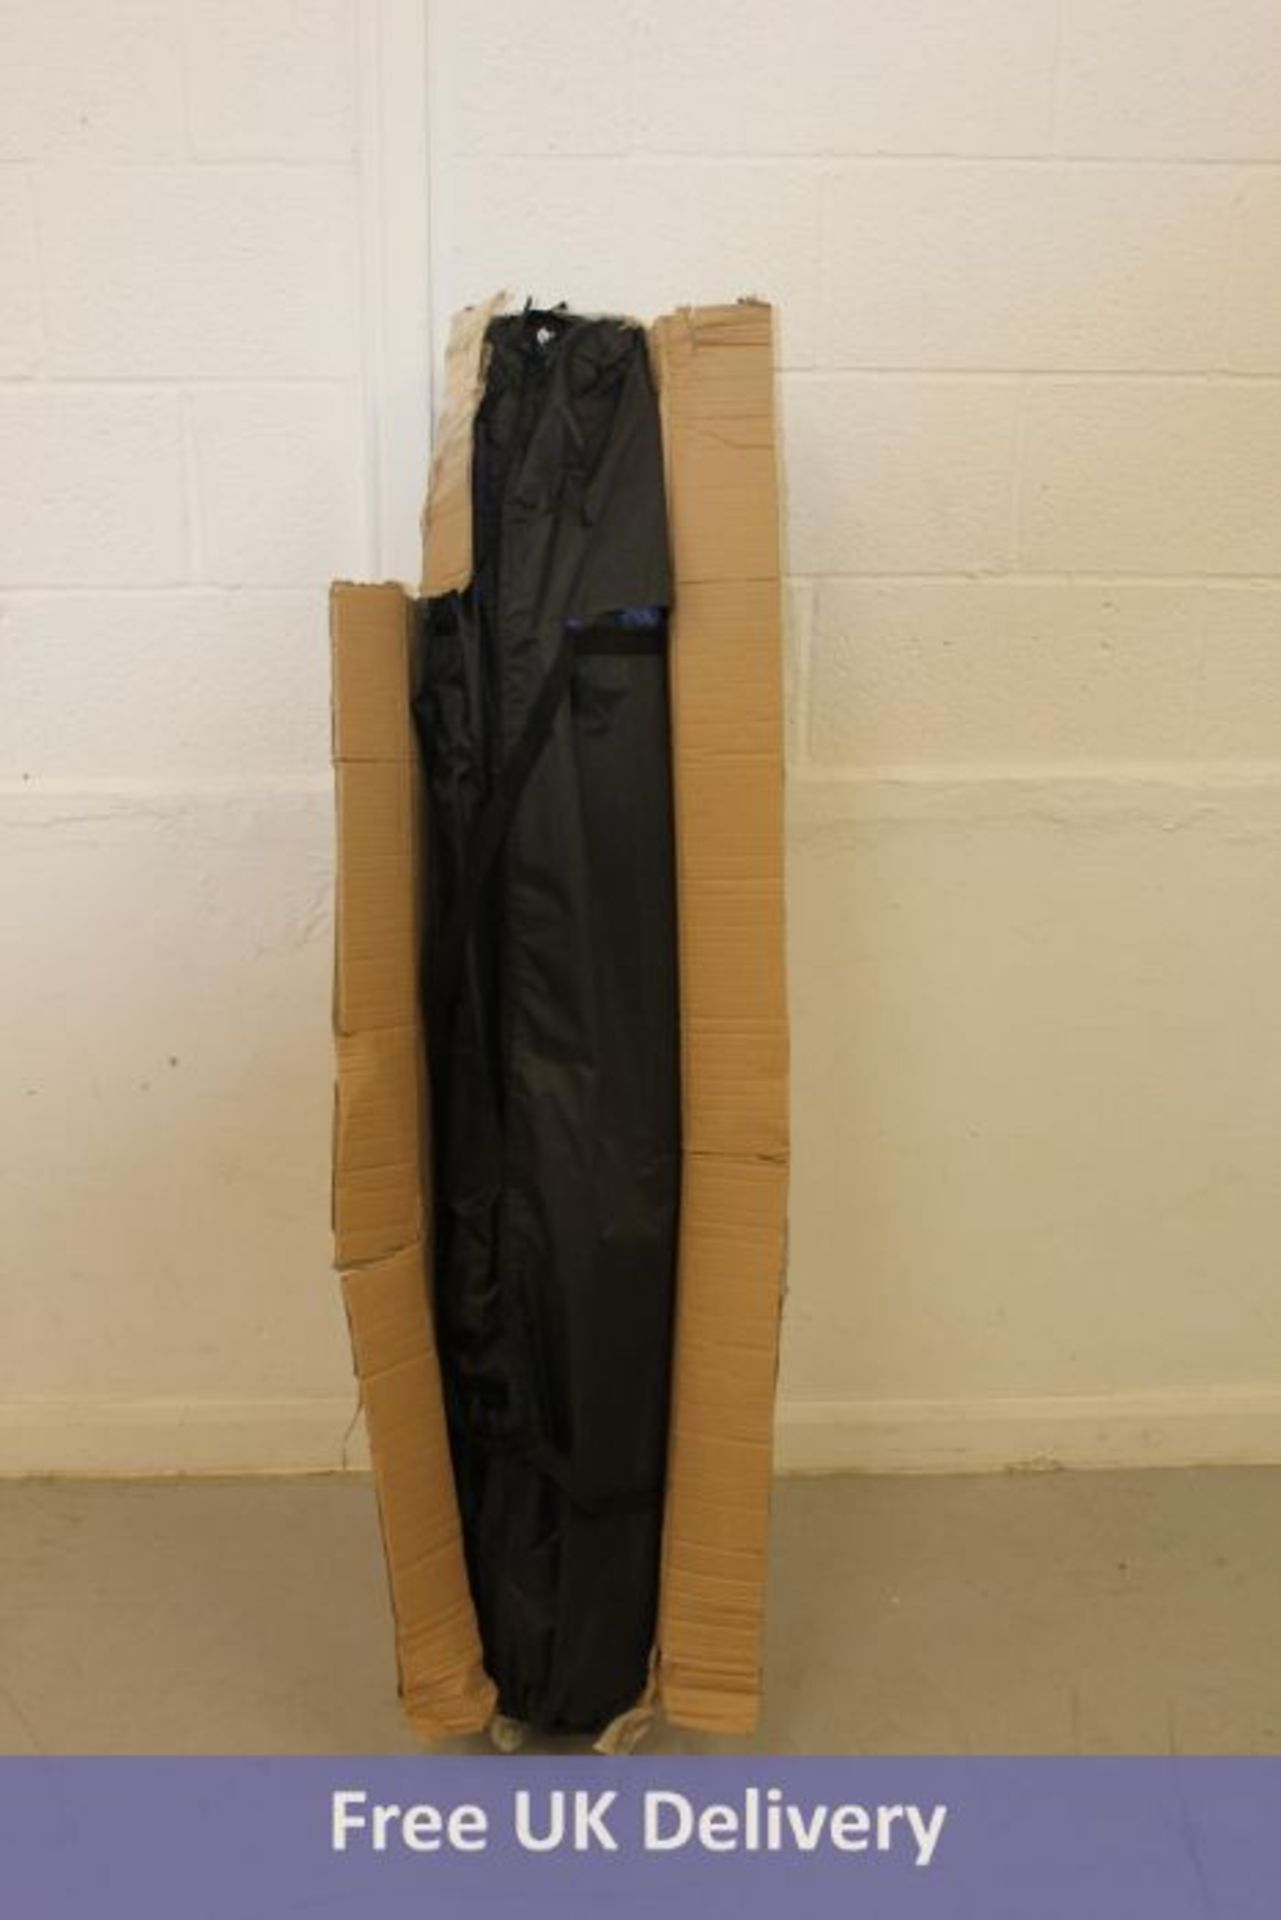 B003E4U1DK Gazebo Blue Pop-Up 2x2m 1EU3G3A0. Bag Ripped, not checked